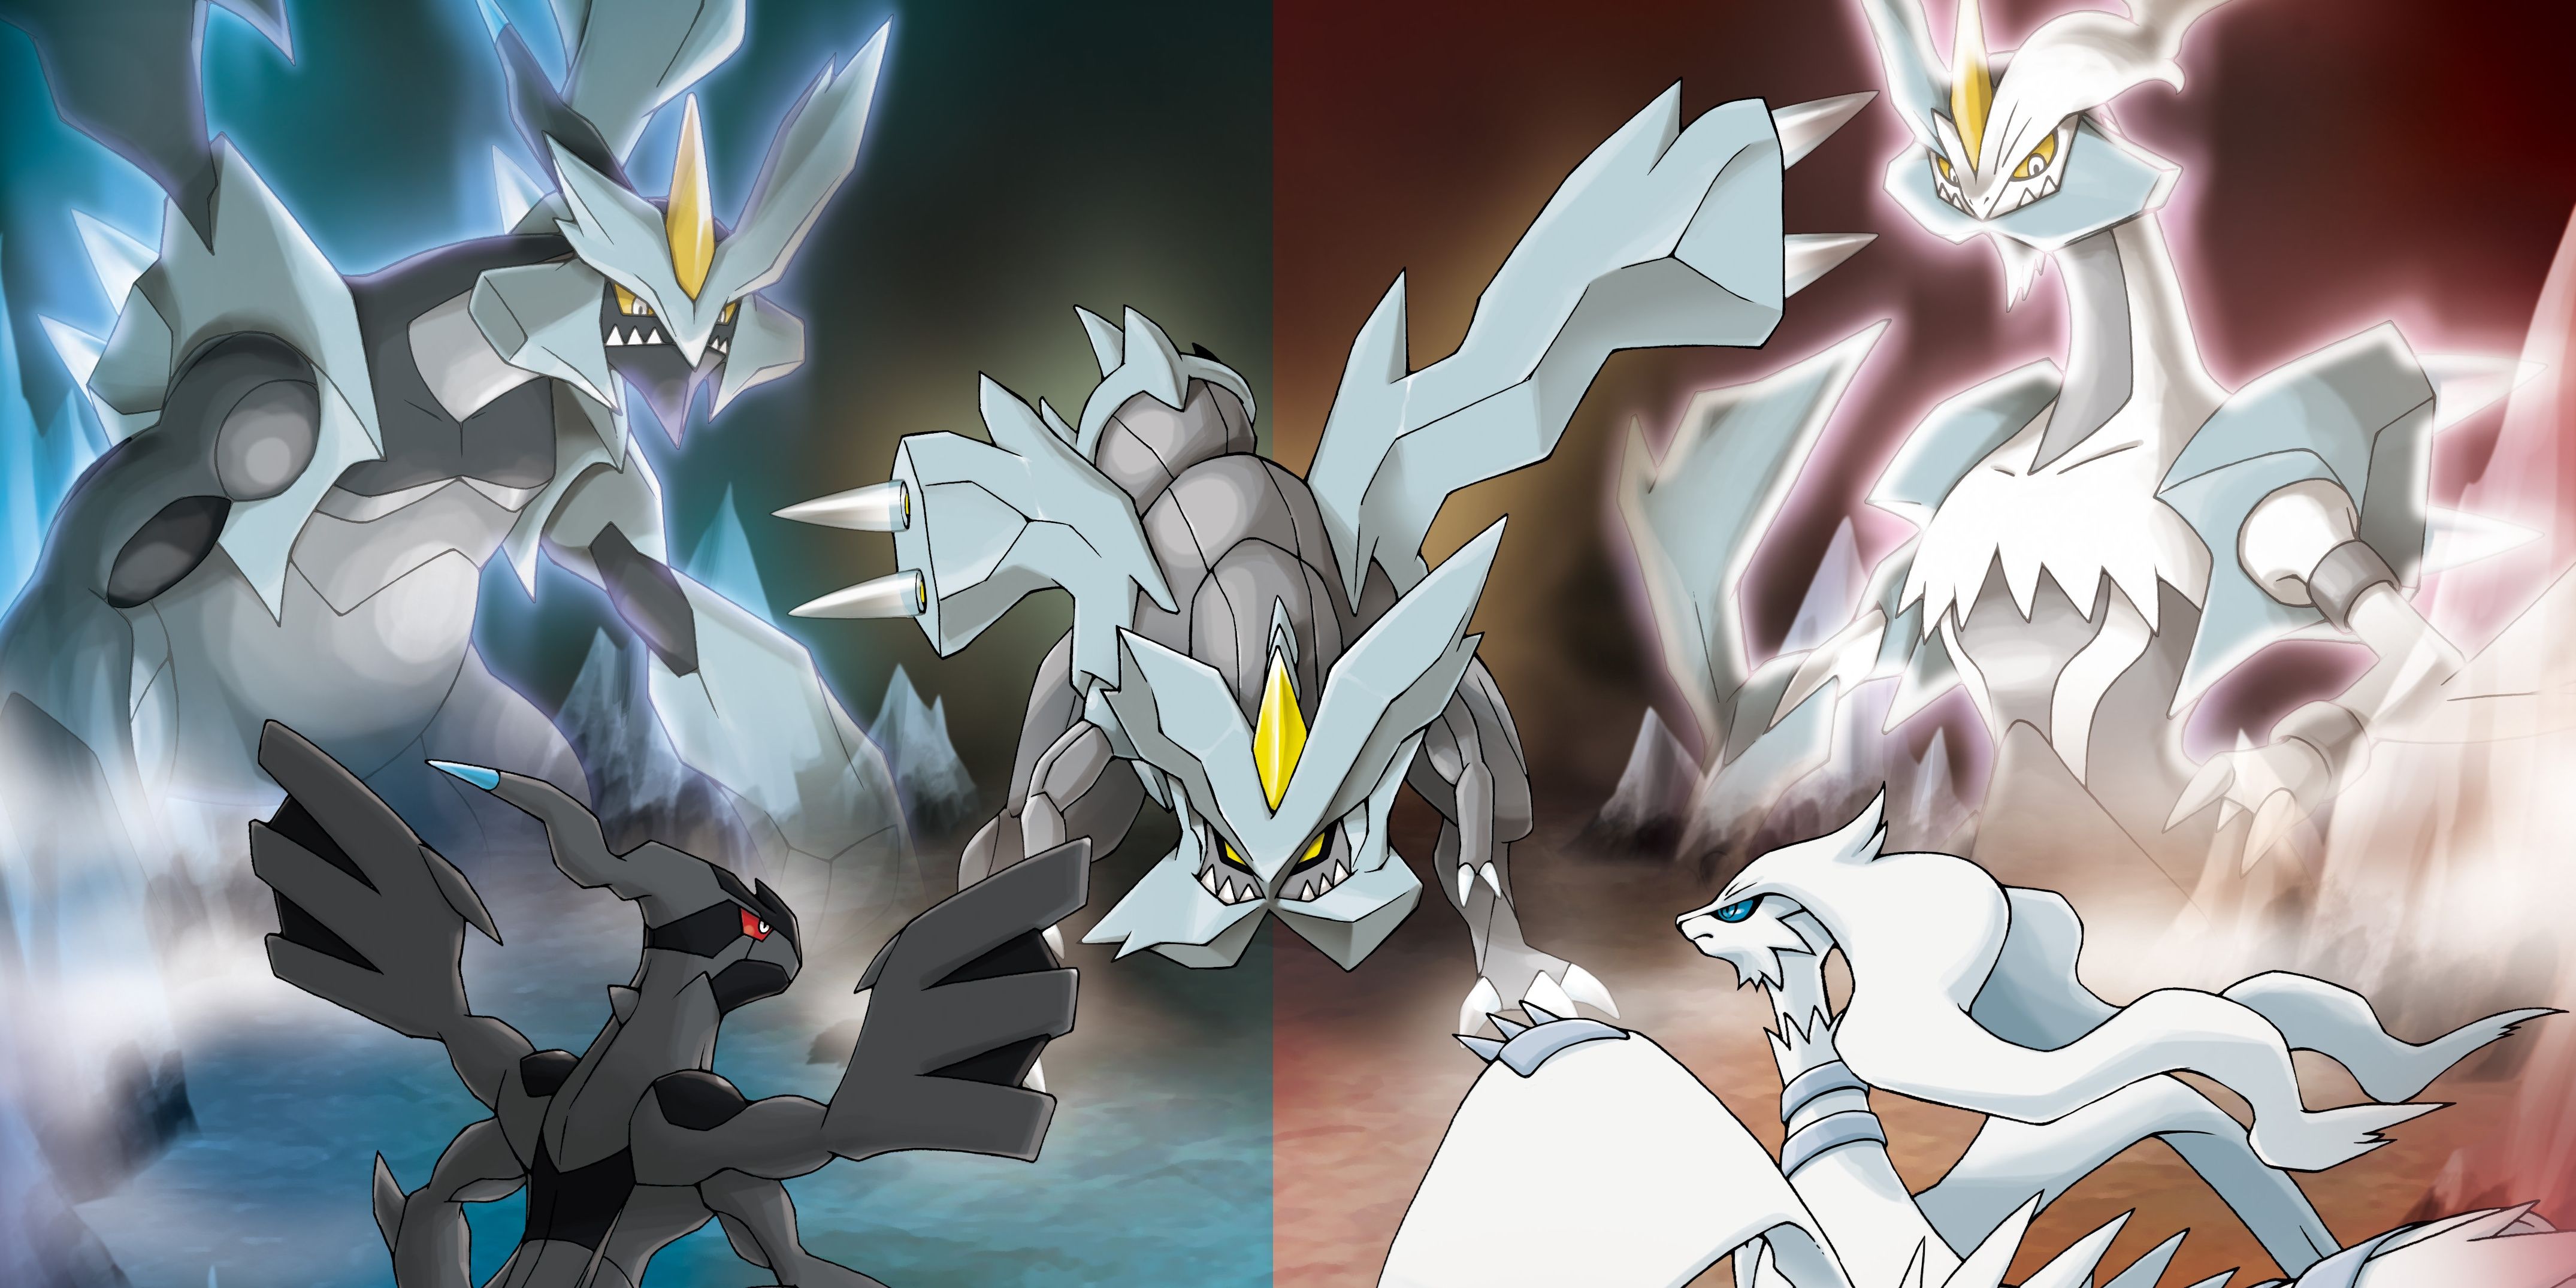 According to Pokemon’s lore, the flagship Legendary dragons of the Gen V ga...